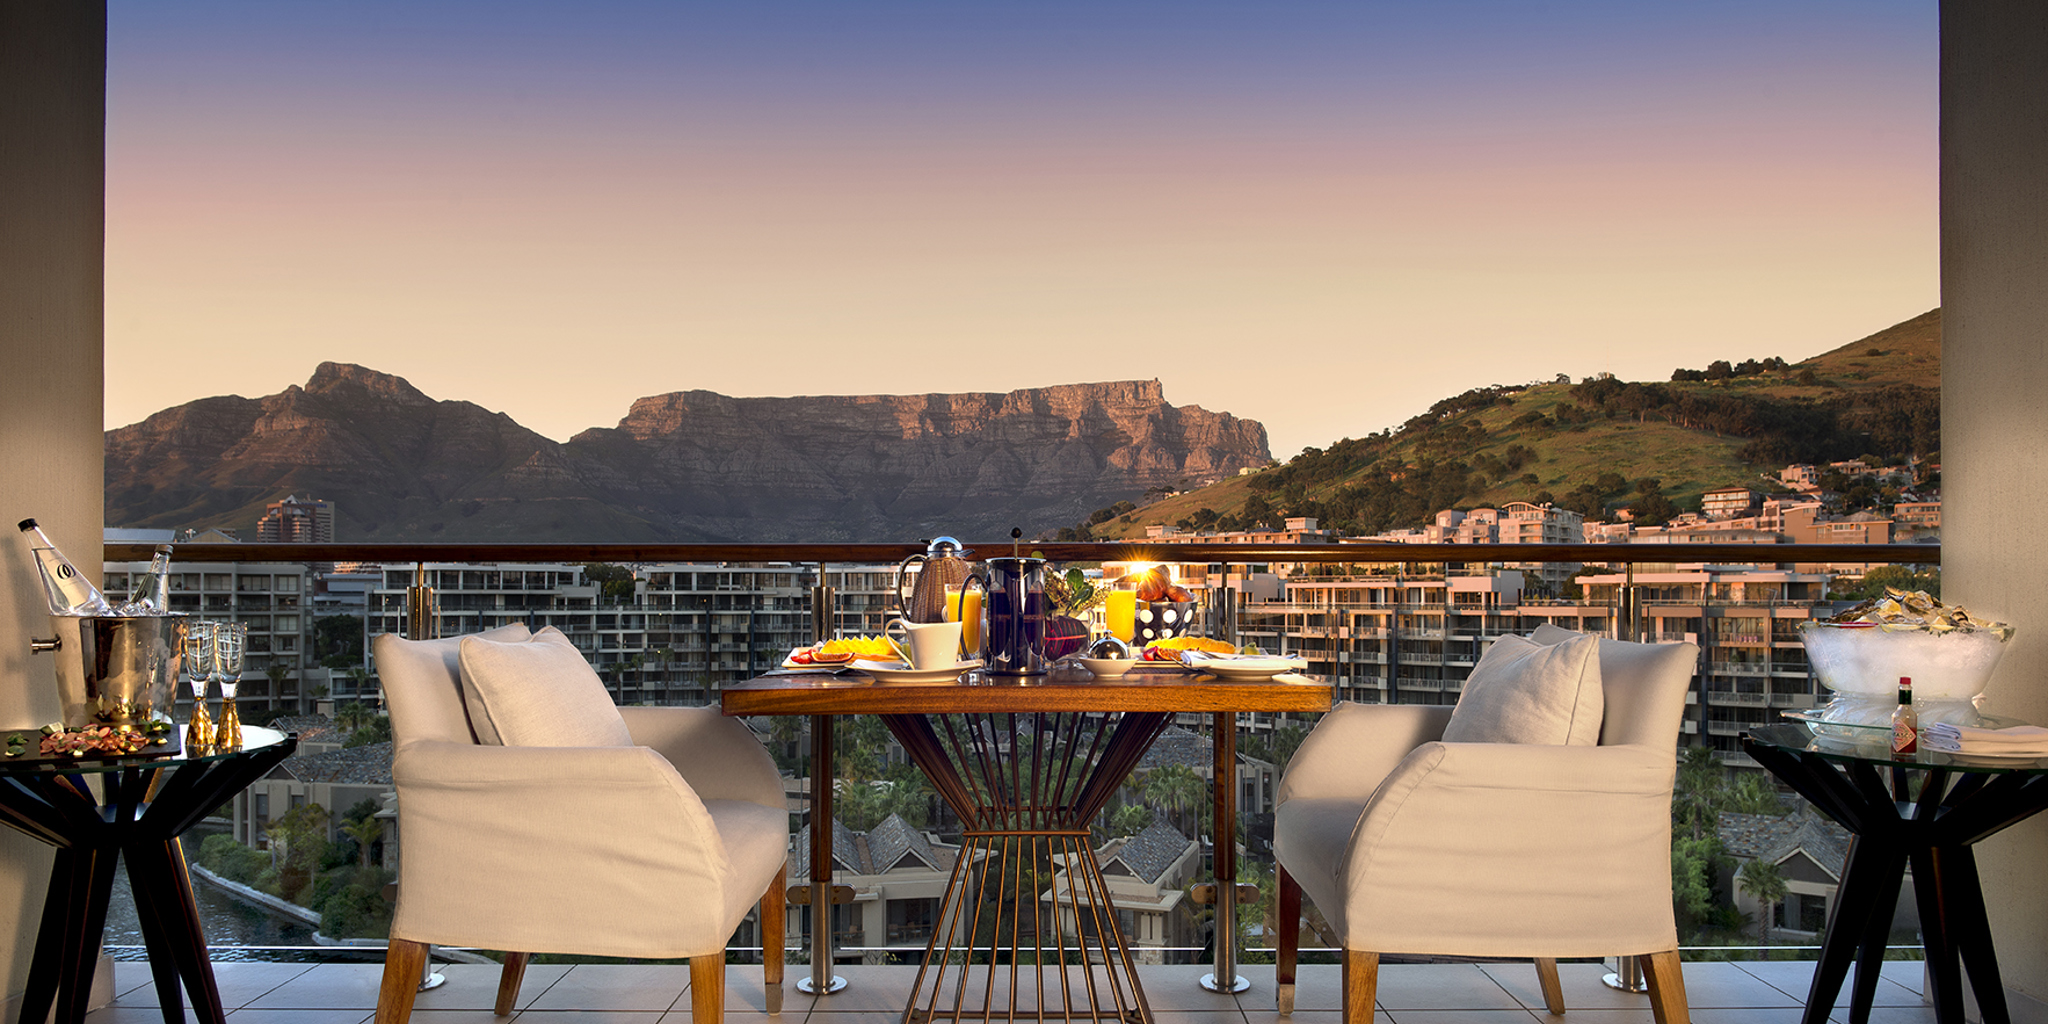 breakfast with a view, cape town, south africa safaris